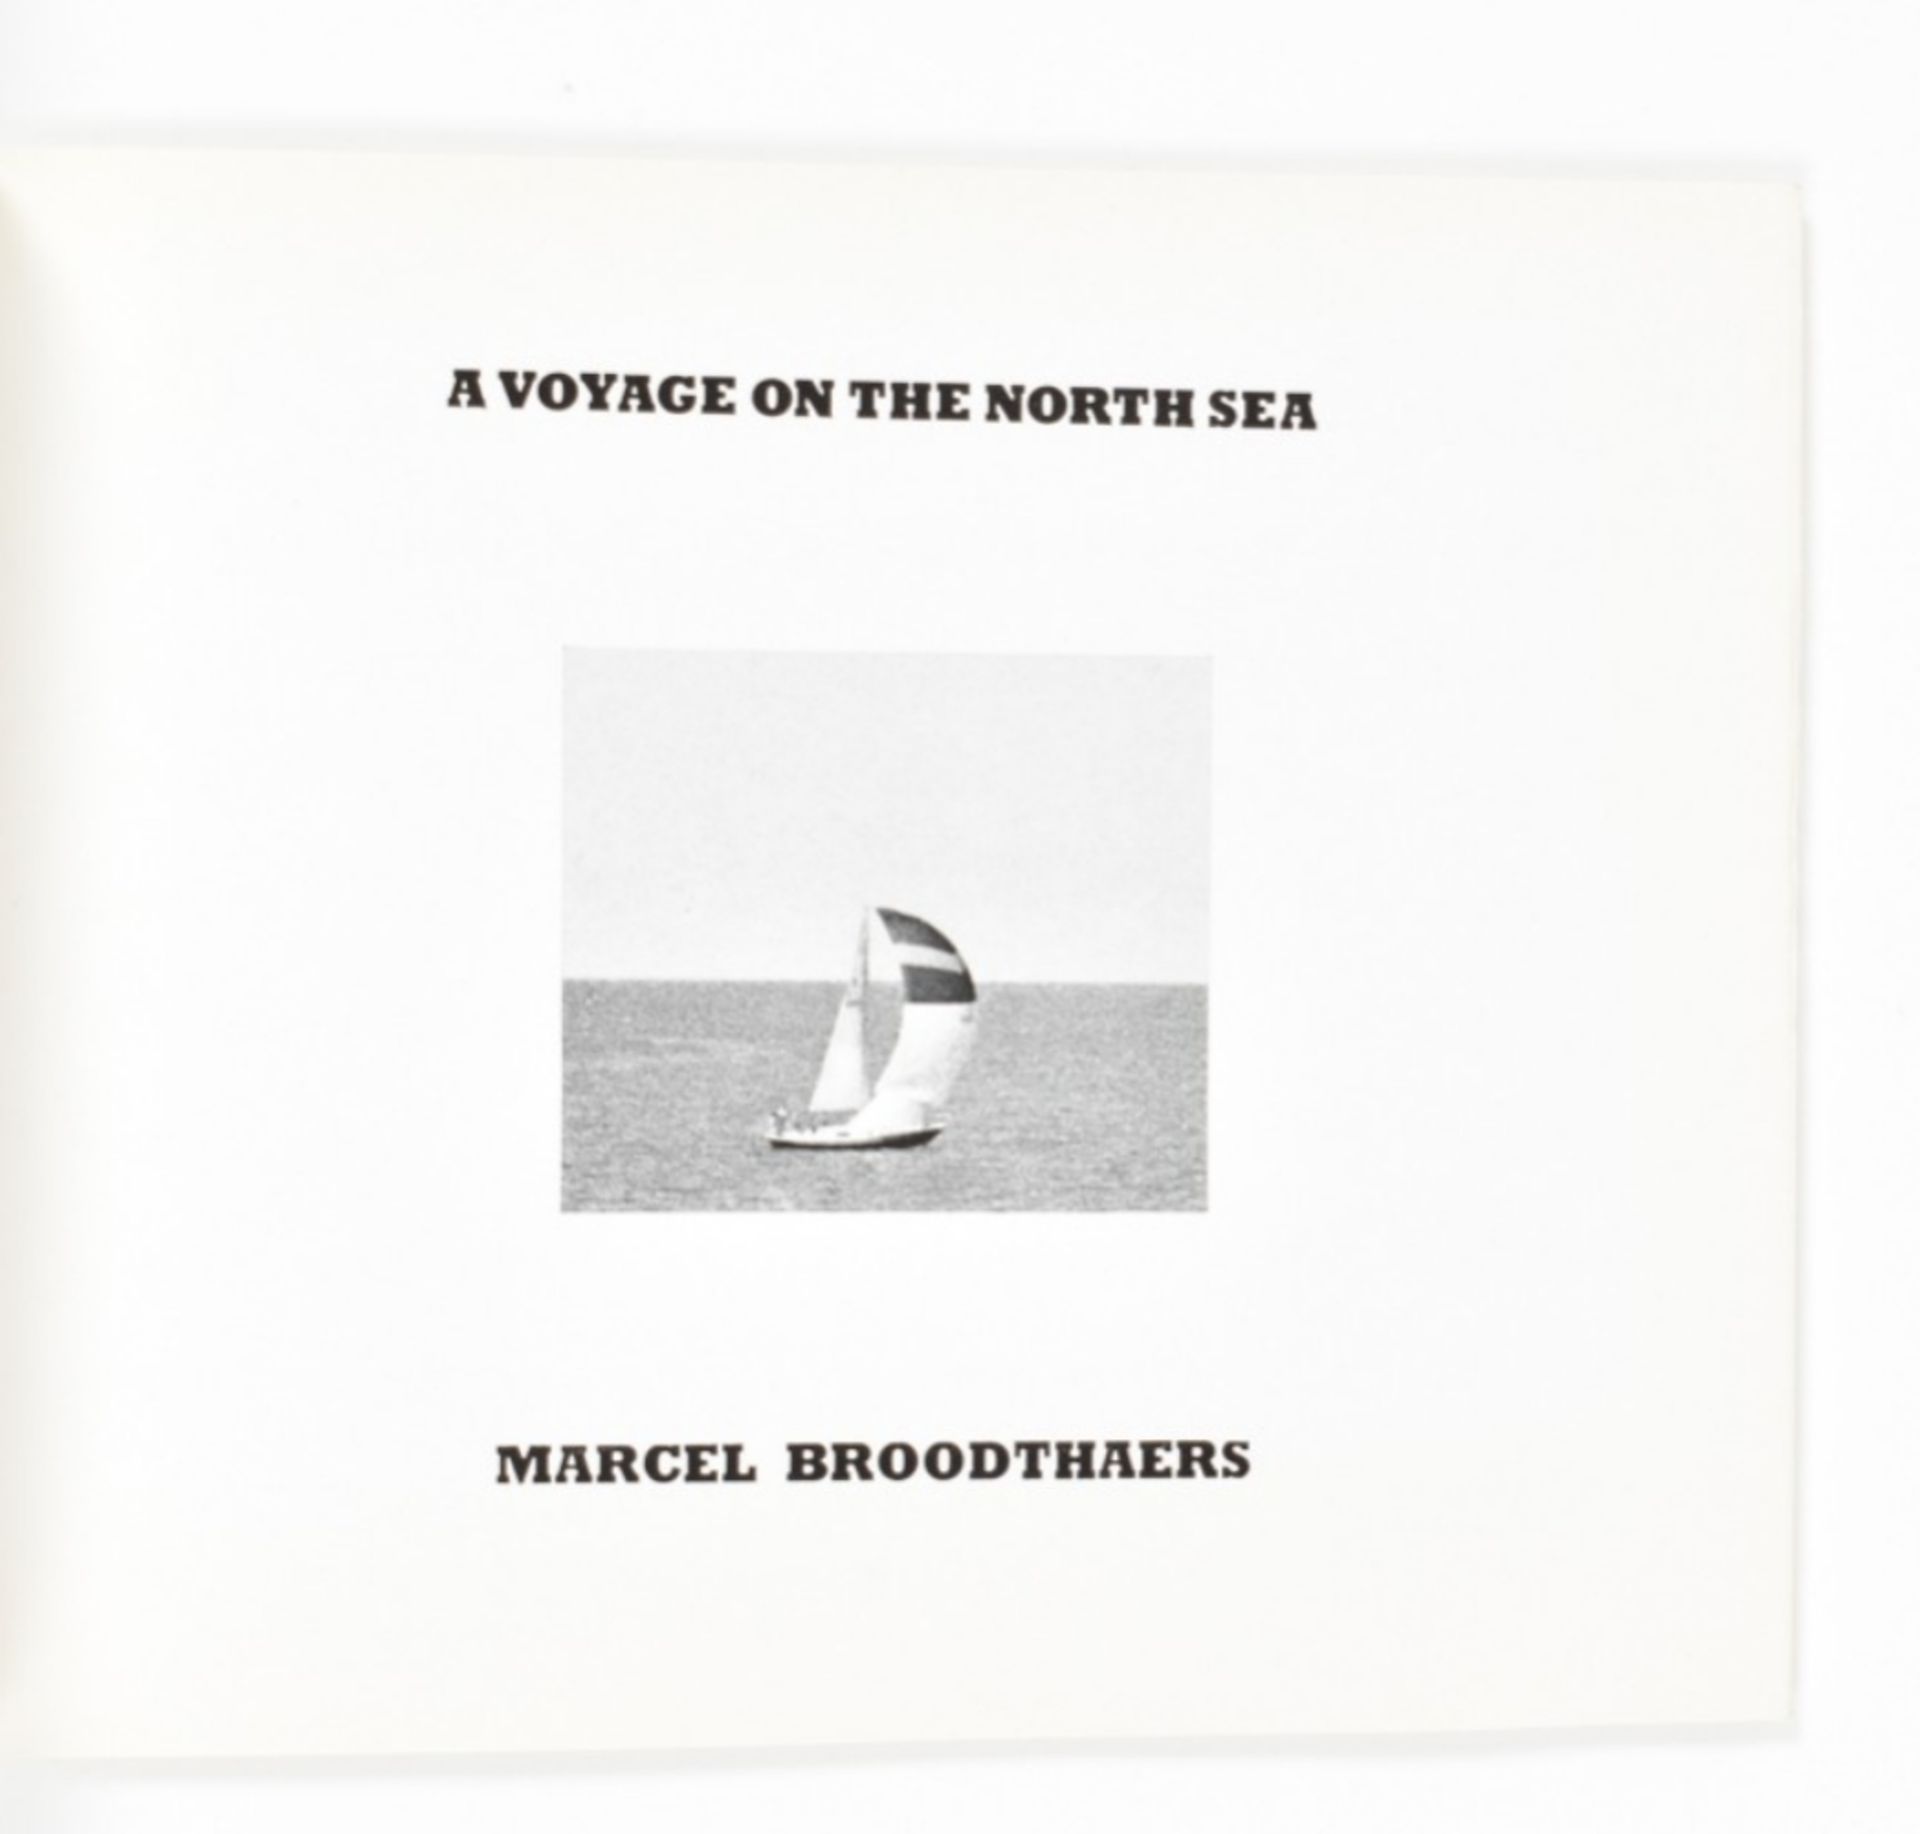 [s and 1970s] Marcel Broodthaers - Image 3 of 6